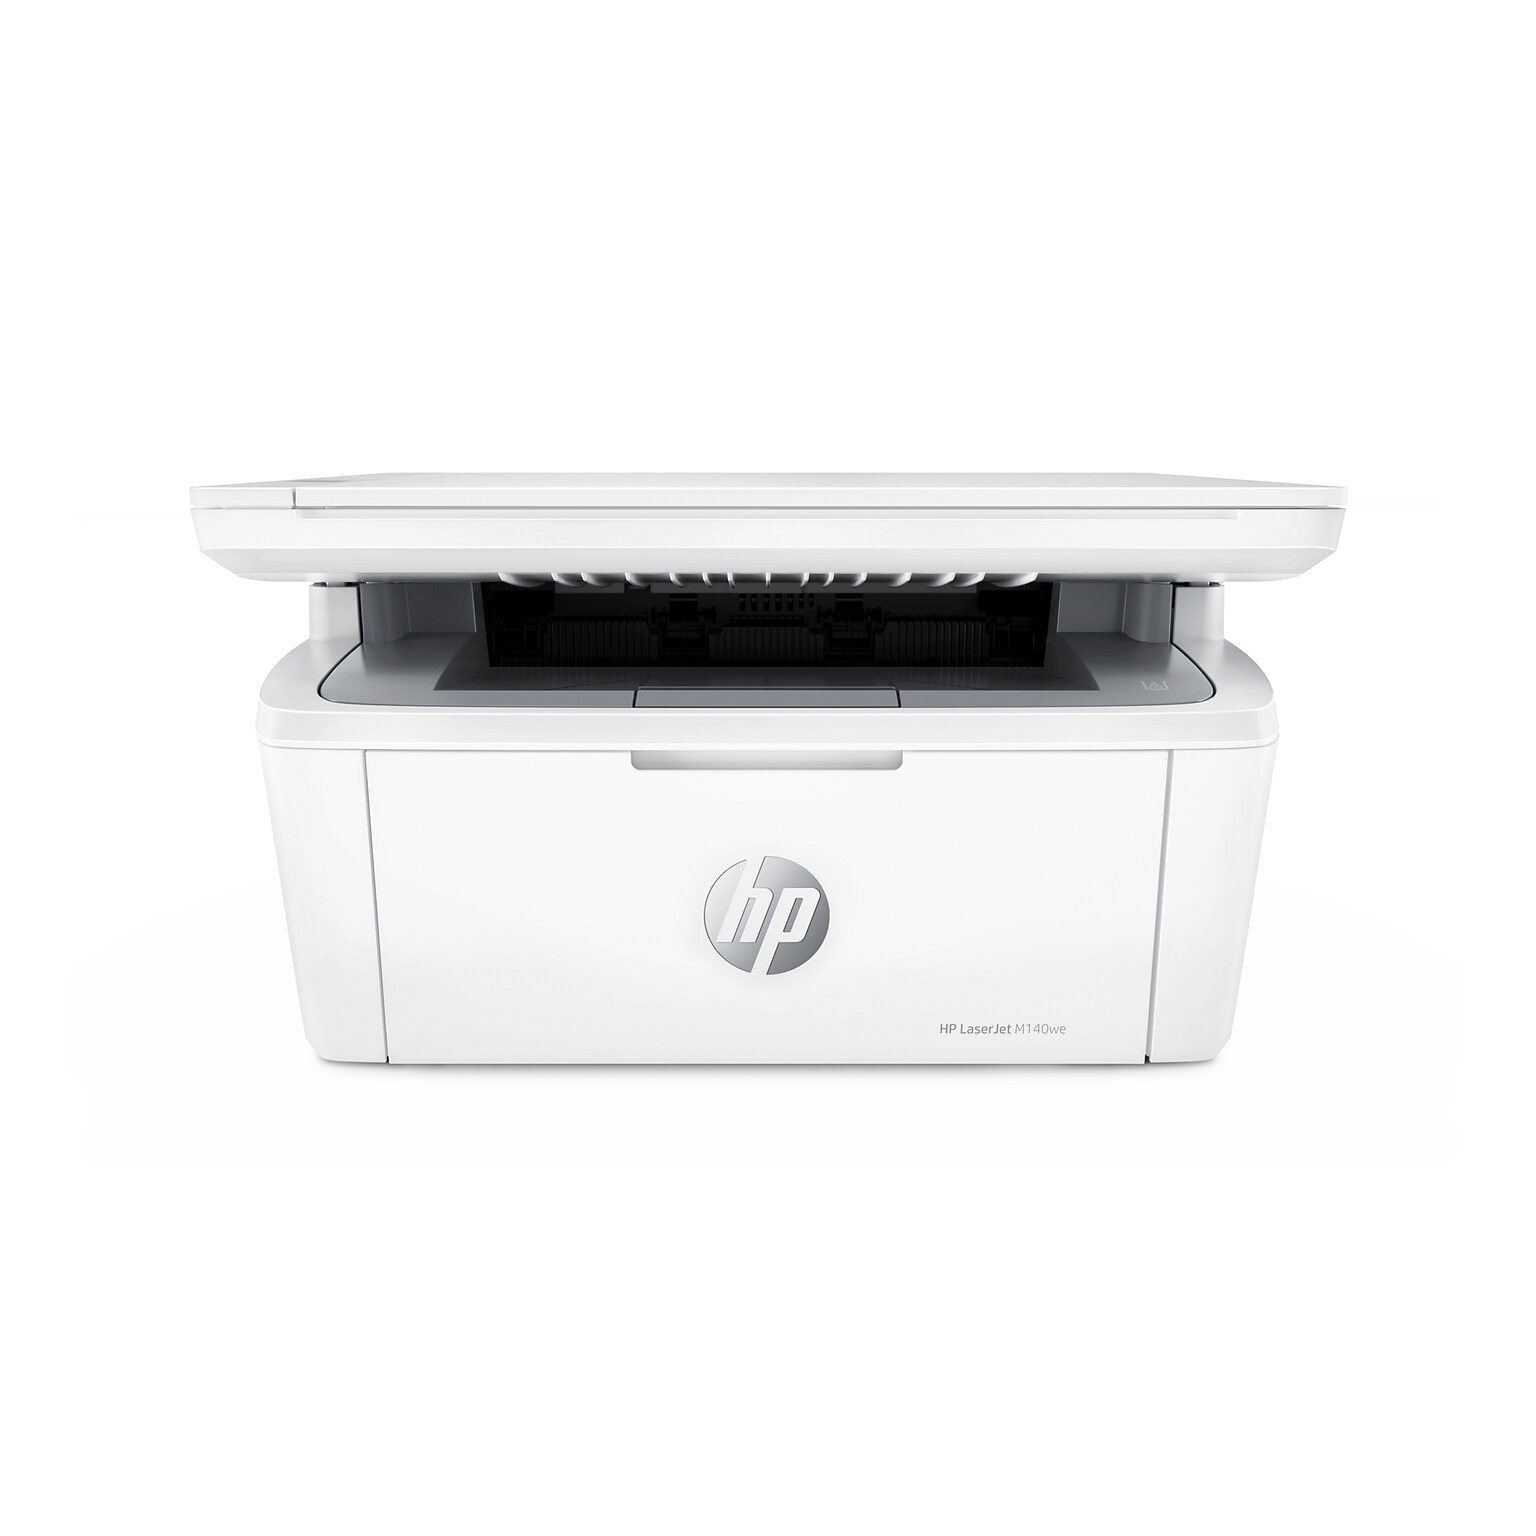 HP LaserJet MFP M140we Wireless Black & White Printer Includes 6 Months of FREE Toner with HP+ (7MD72E)